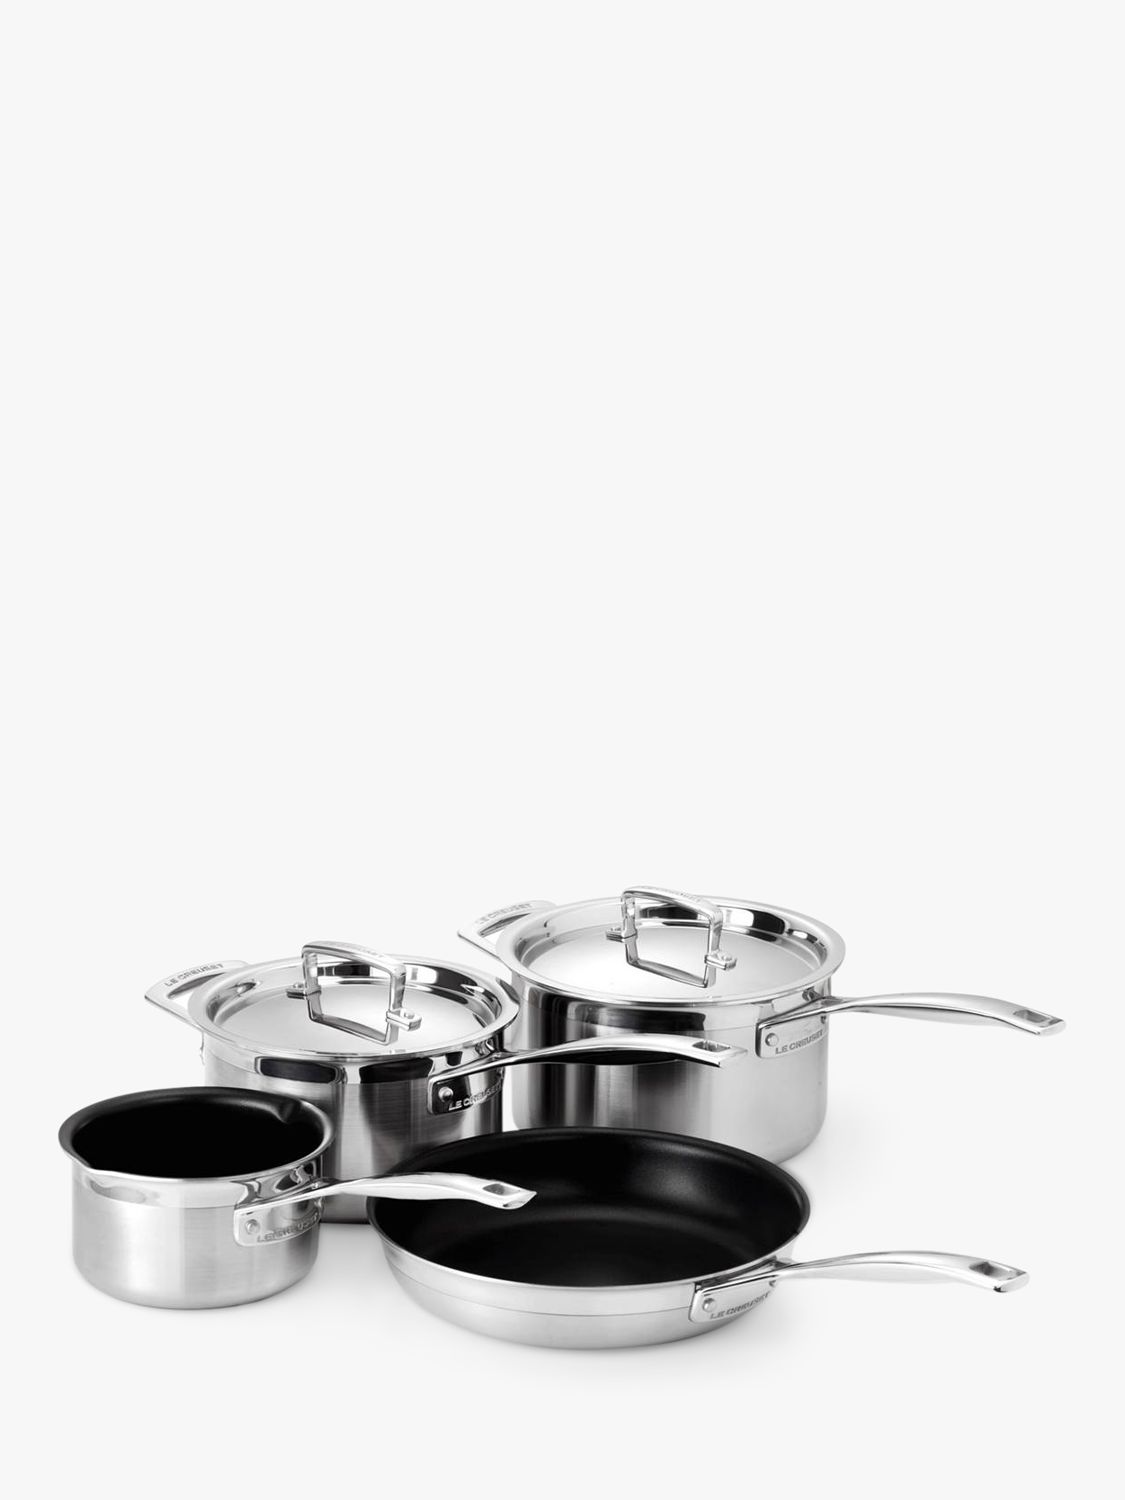 Royal Prestige 7 ply copper titanium silver alloy stainless steel 8 sauce  pan